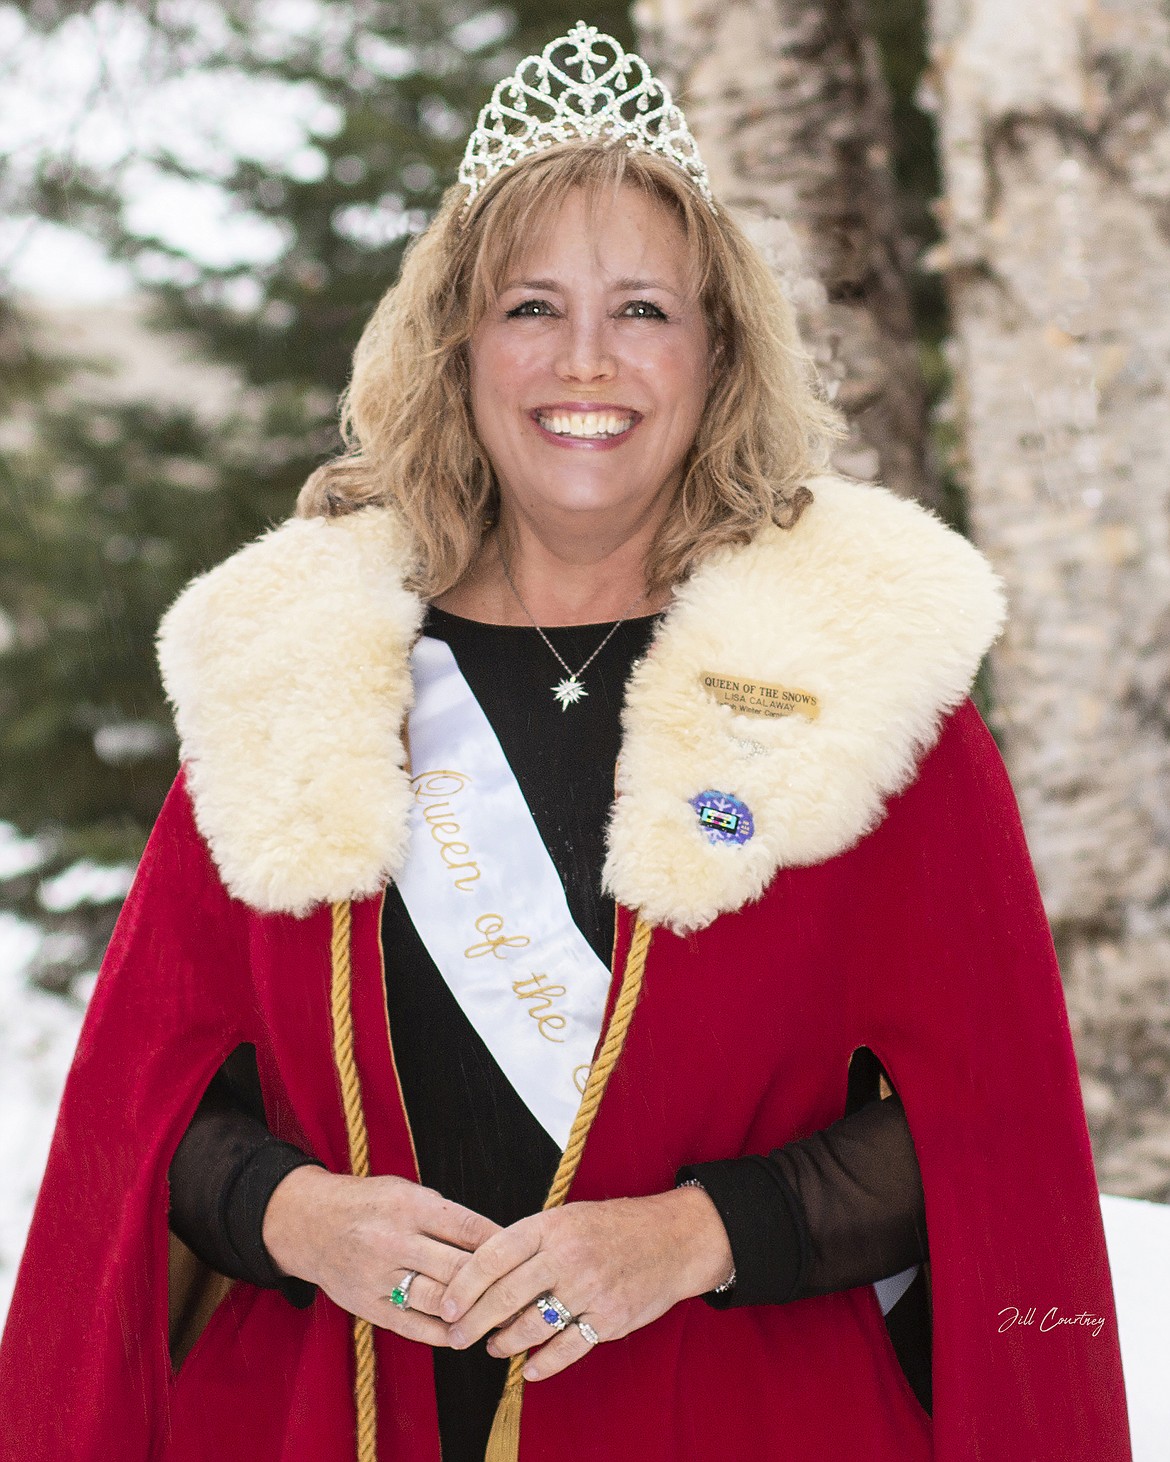 Lisa Calaway is the Winter Carnival Queen of Snow LXIII. (Jilly Courtney photo)